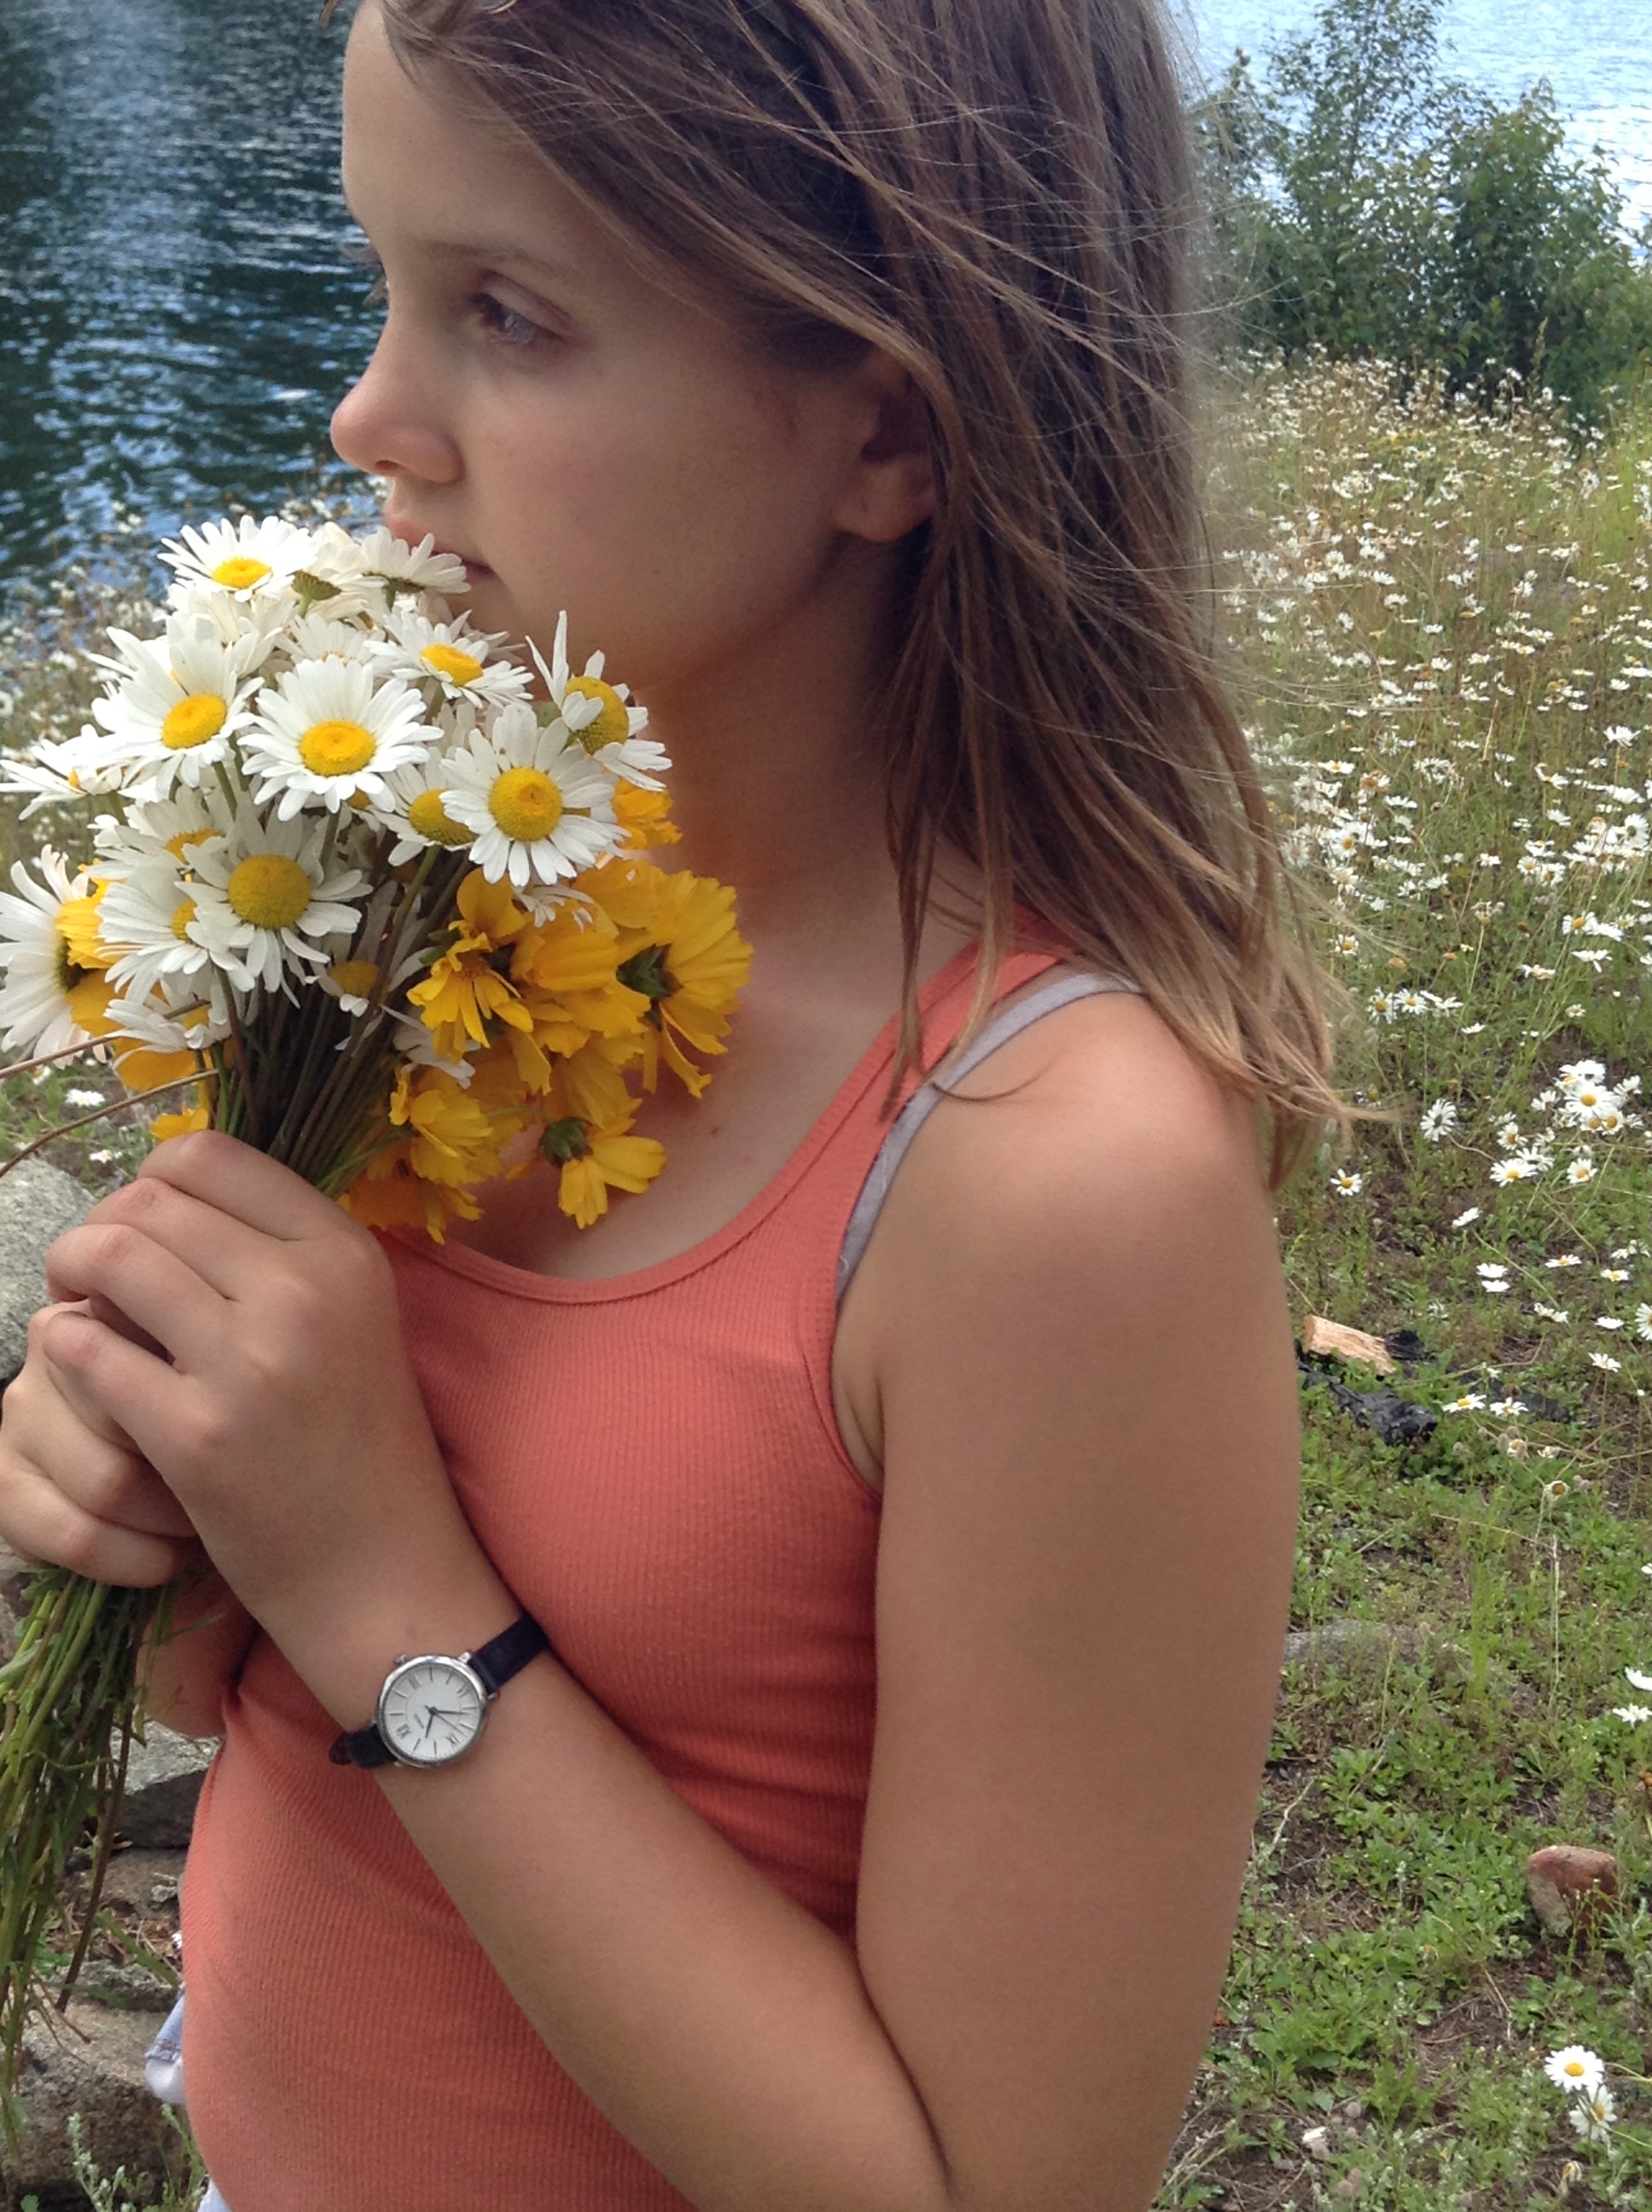 Madelyn stopping to smell the daisies
